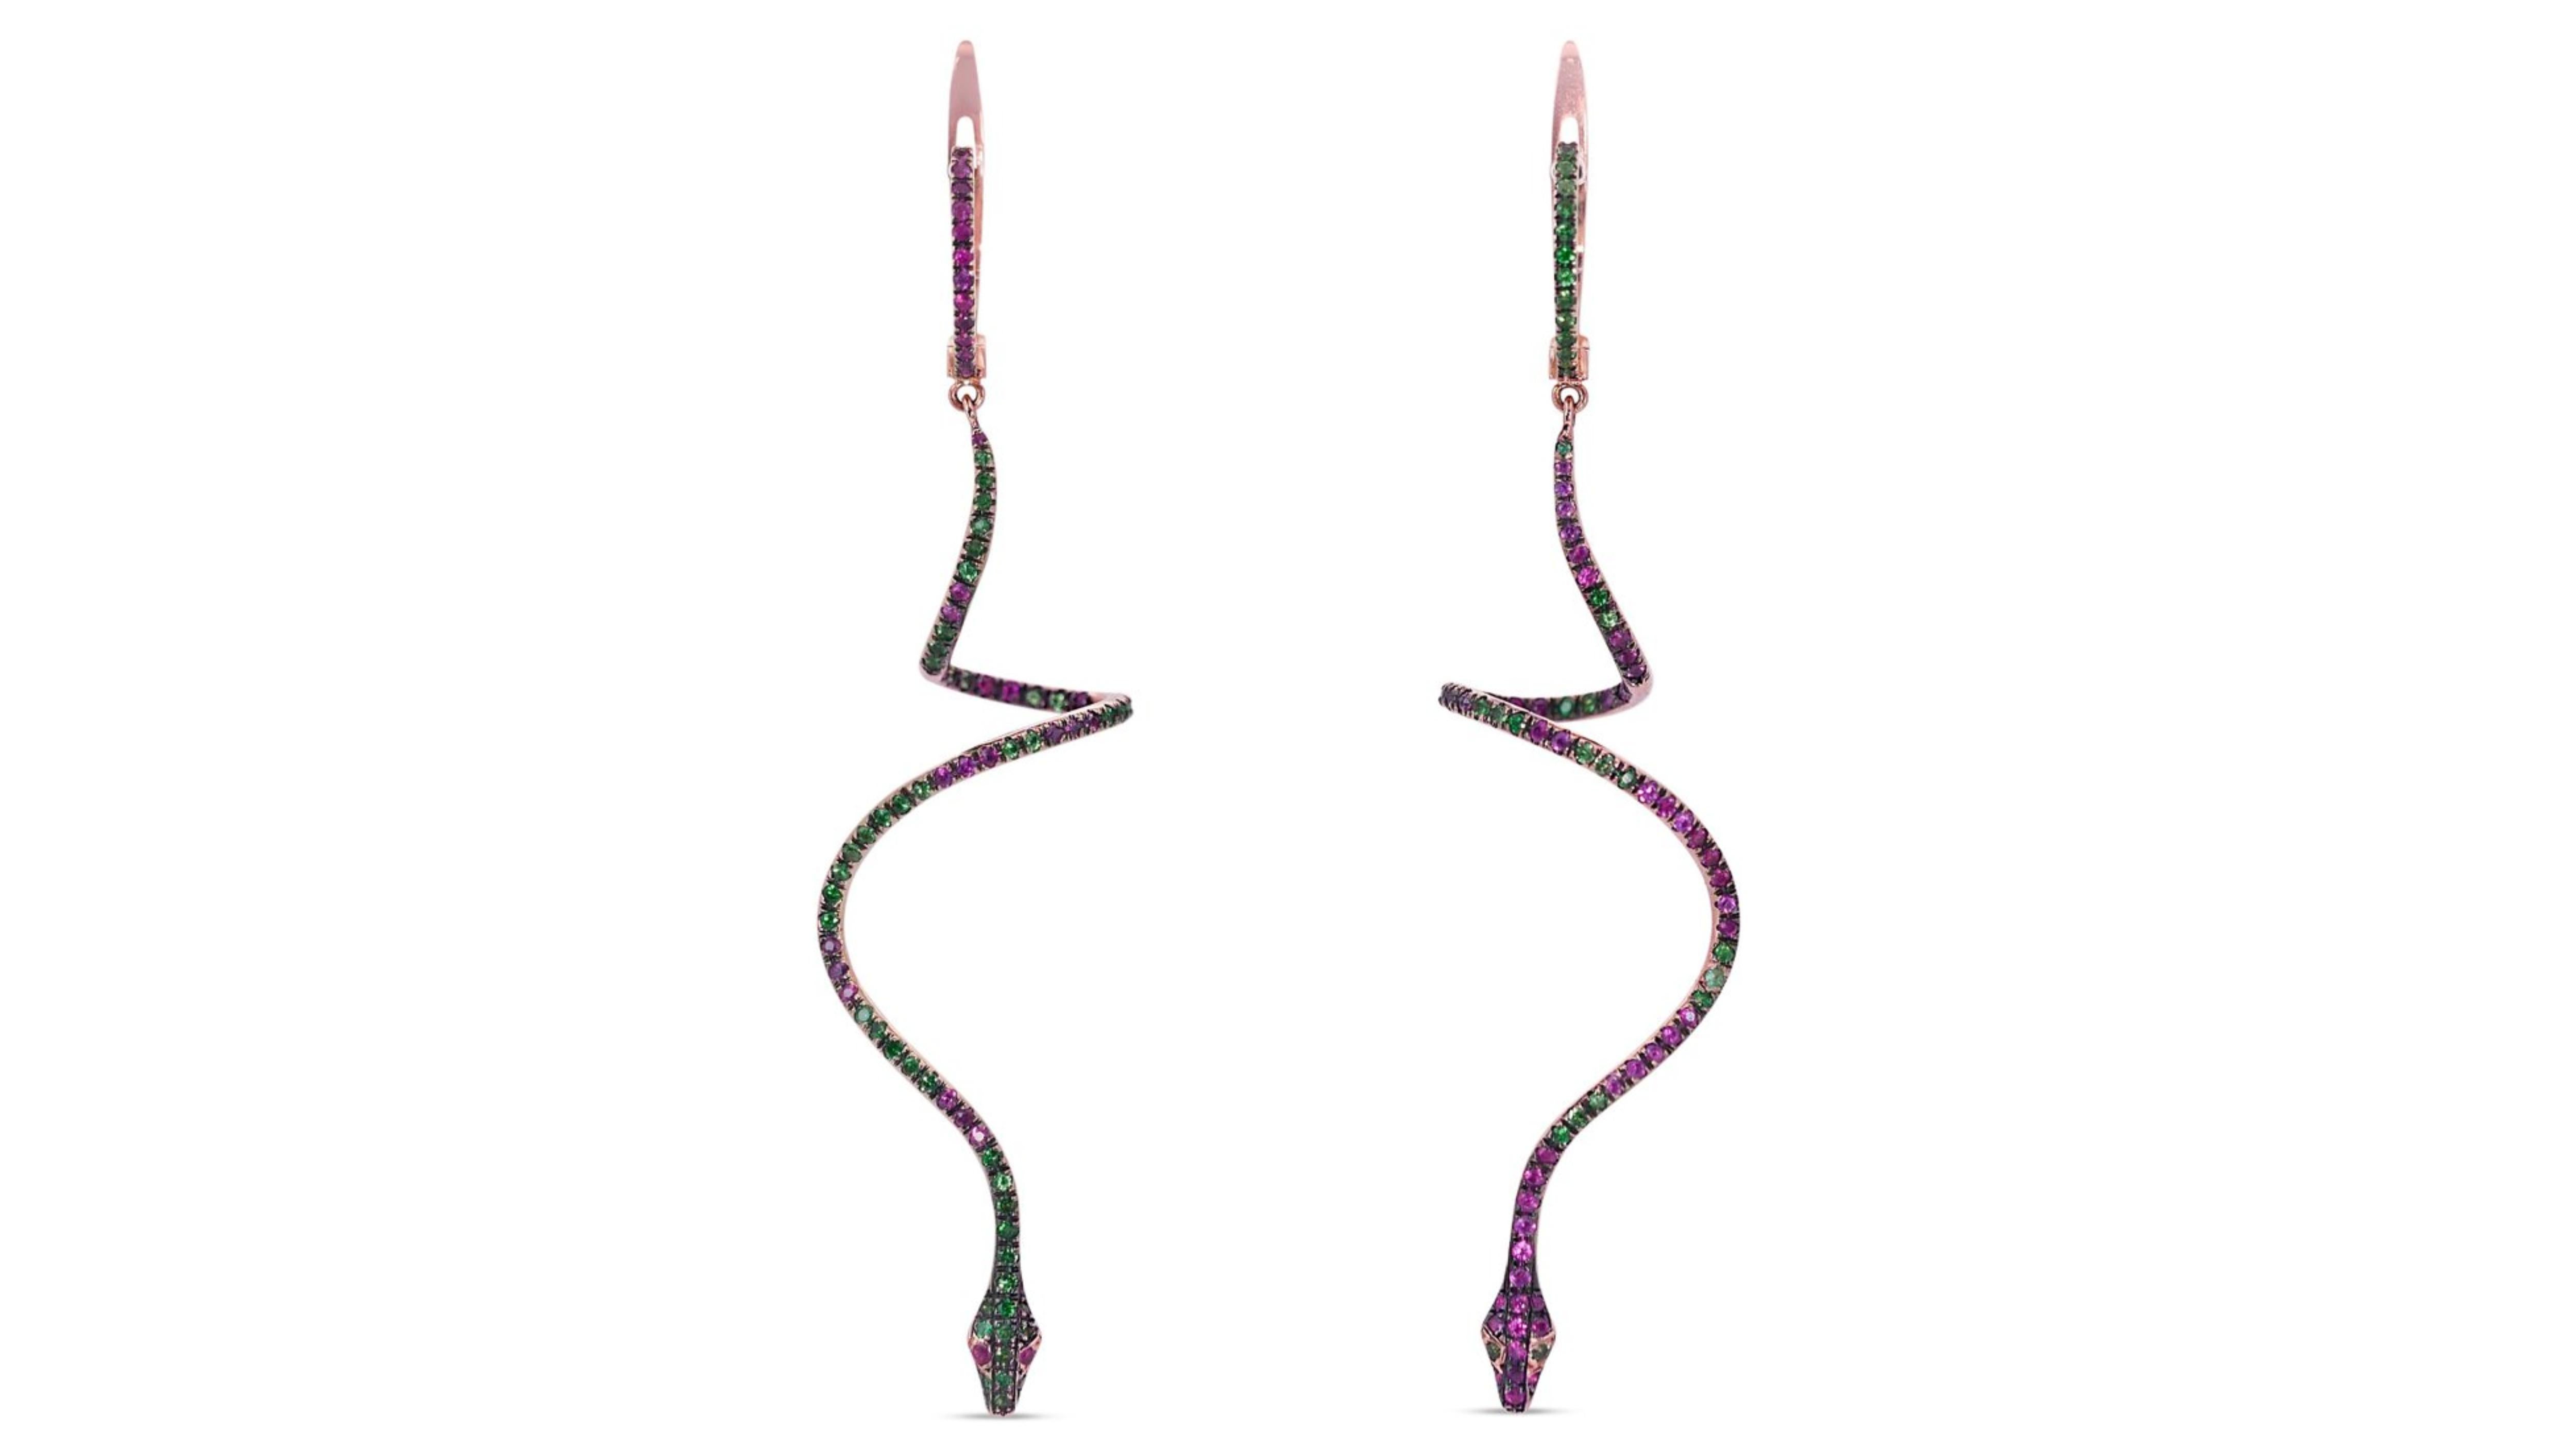 Glamorous 18k Pink Gold Earrings with 2.57 total carat of Natural Emerald and Ru 2